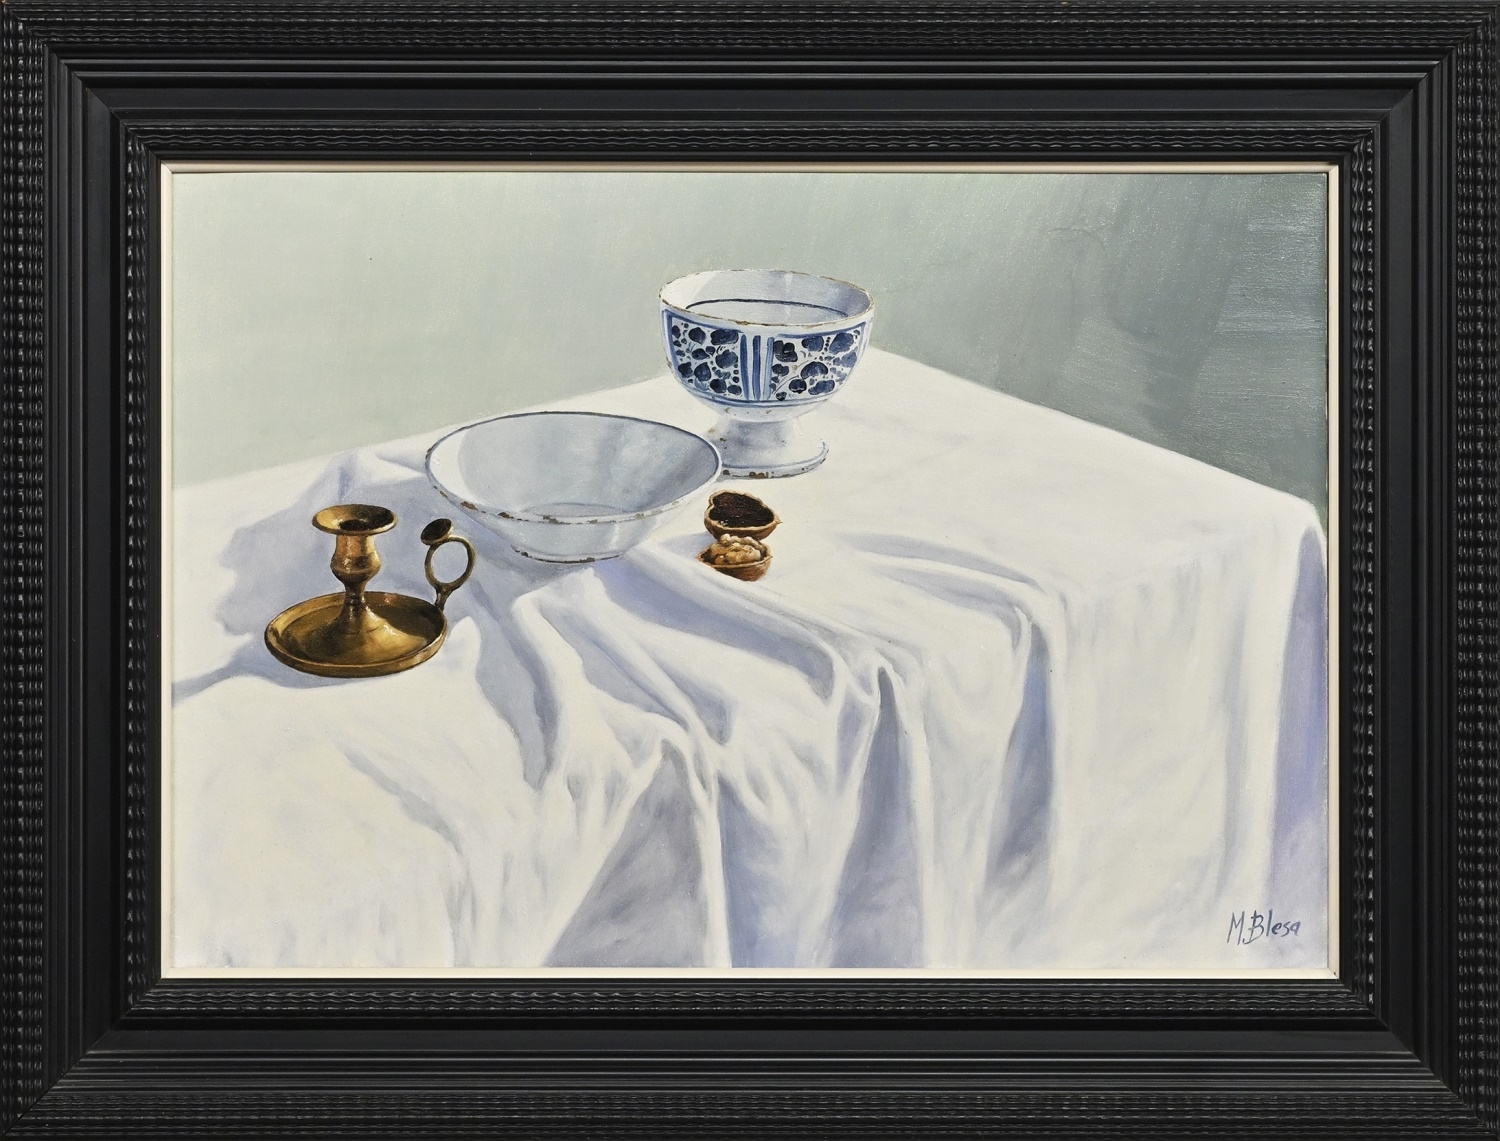 STILL LIFE WITH CERAMICS AND BRASS CANDLESTICK by Manuel Blesa